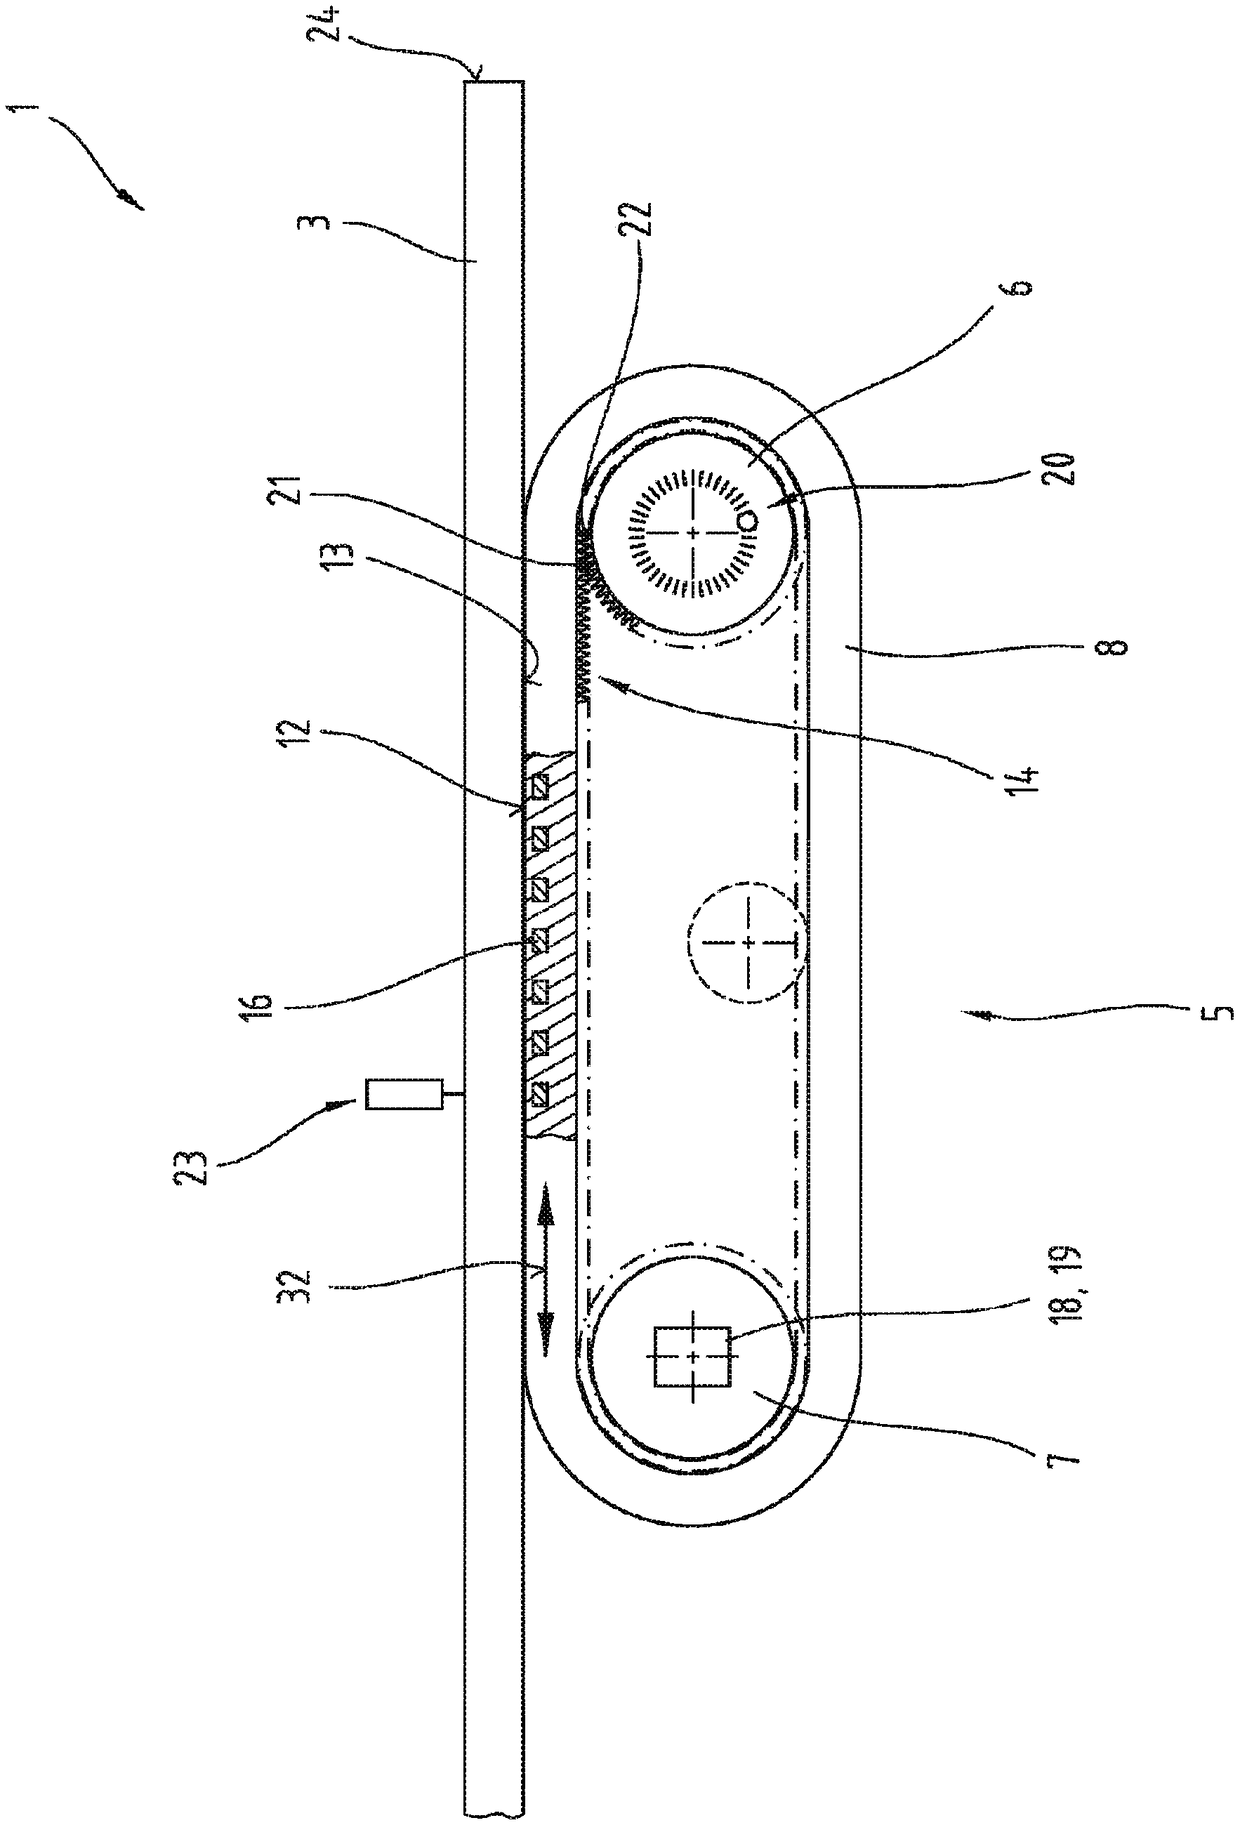 Production system for processing a wire material wound to form a wire reel, comprising a conveying means with permanent magnets